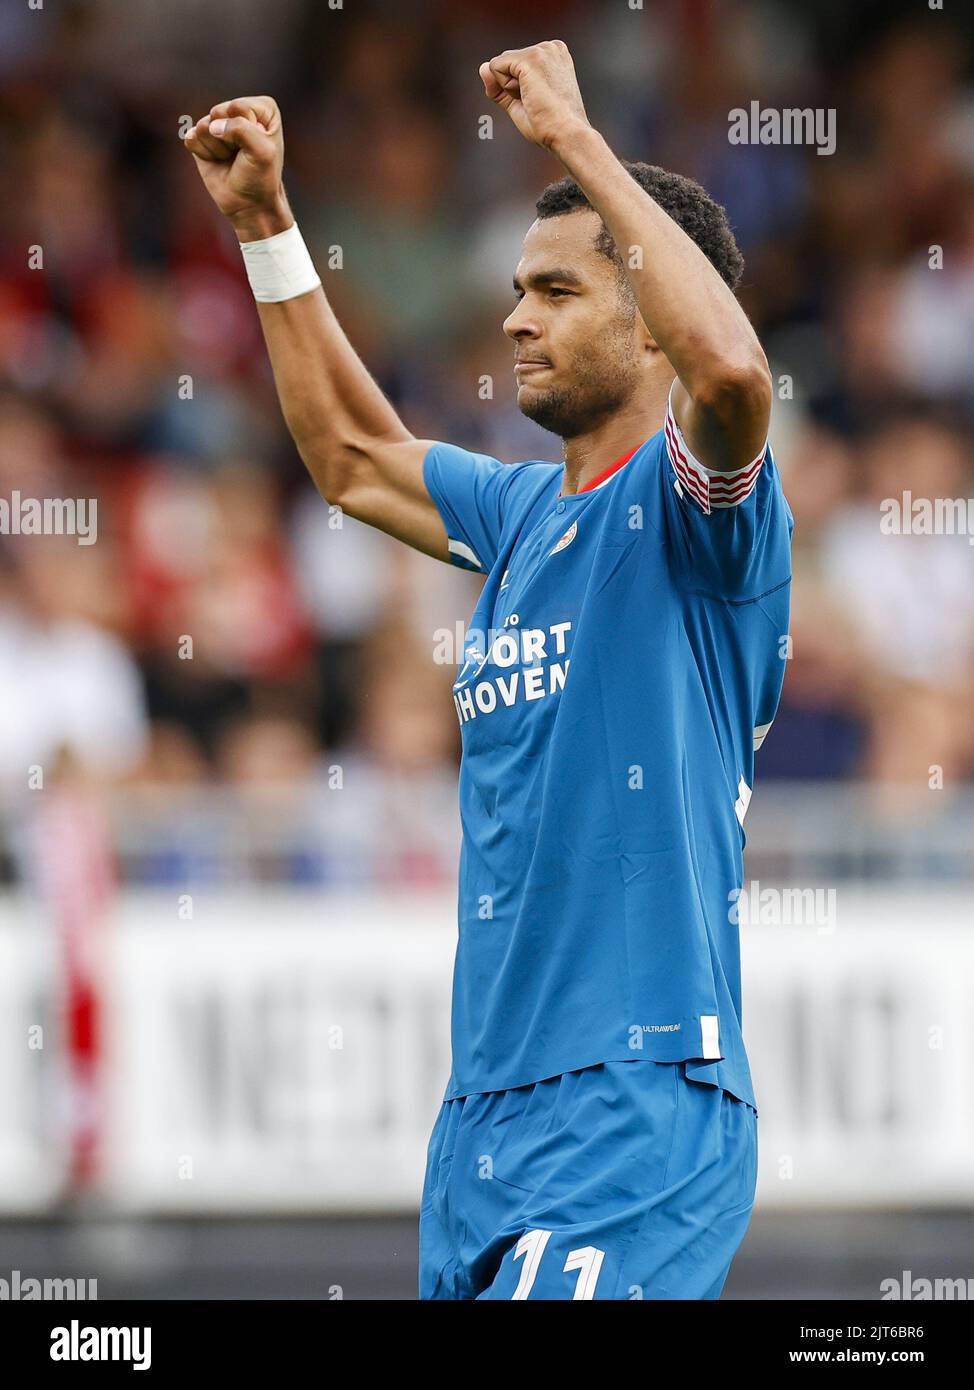 Utrecht, Netherlands. 28th Aug, 2022. ROTTERDAM - Cody Gakpo of PSV Eindhoven celebrates 5-0 during the Dutch Eredivisie match between sbv Excelsior and PSV Eindhoven at the Van Donge & De Roo Stadium on August 28, 2022 in Rotterdam, Netherlands. ANP PIETER STAM DE YOUNG Credit: ANP/Alamy Live News Stock Photo